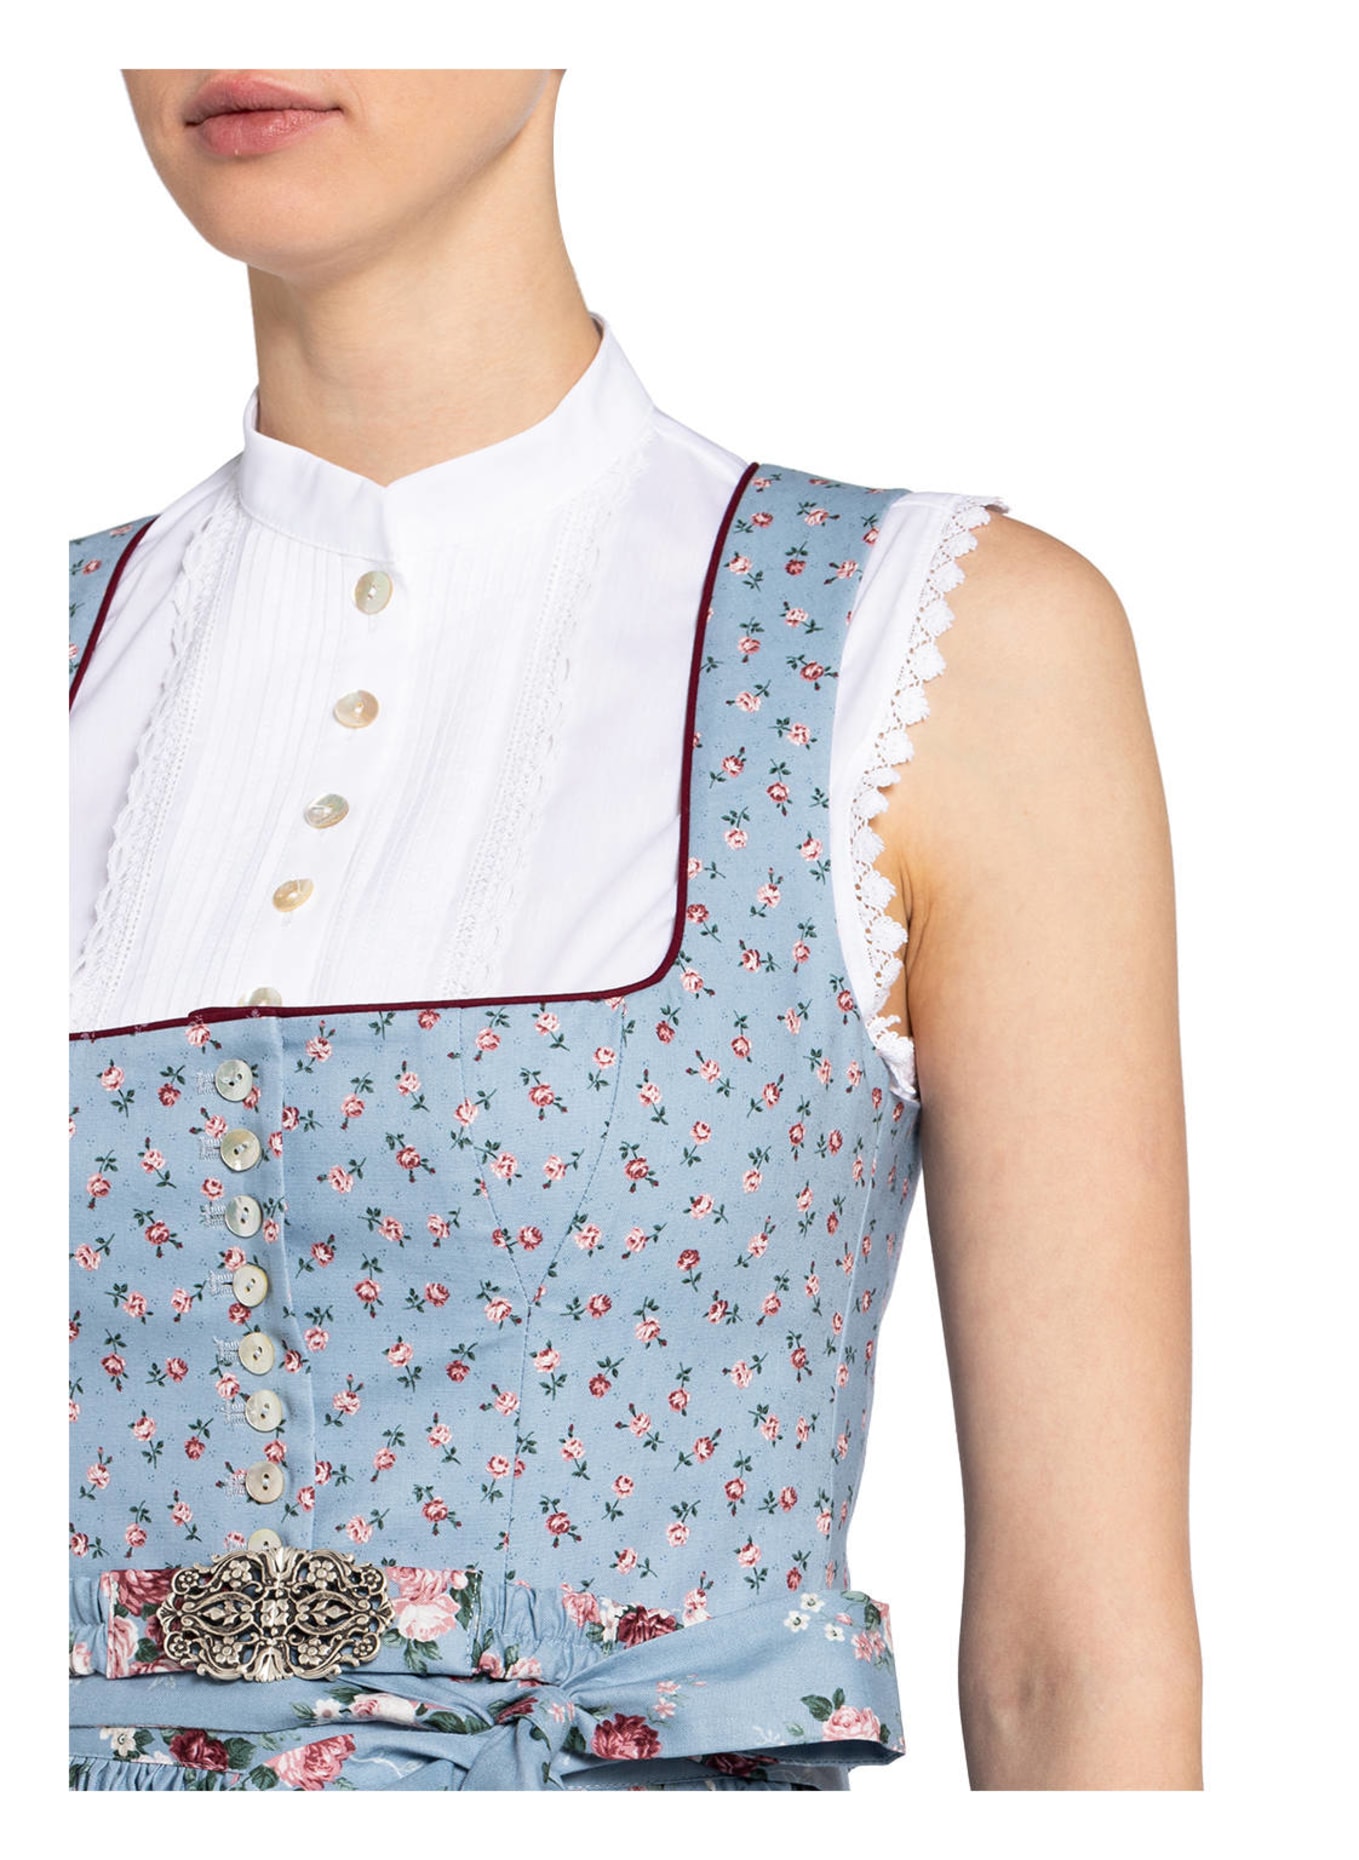 SPORTALM Dirndl blouse with embroidery in white